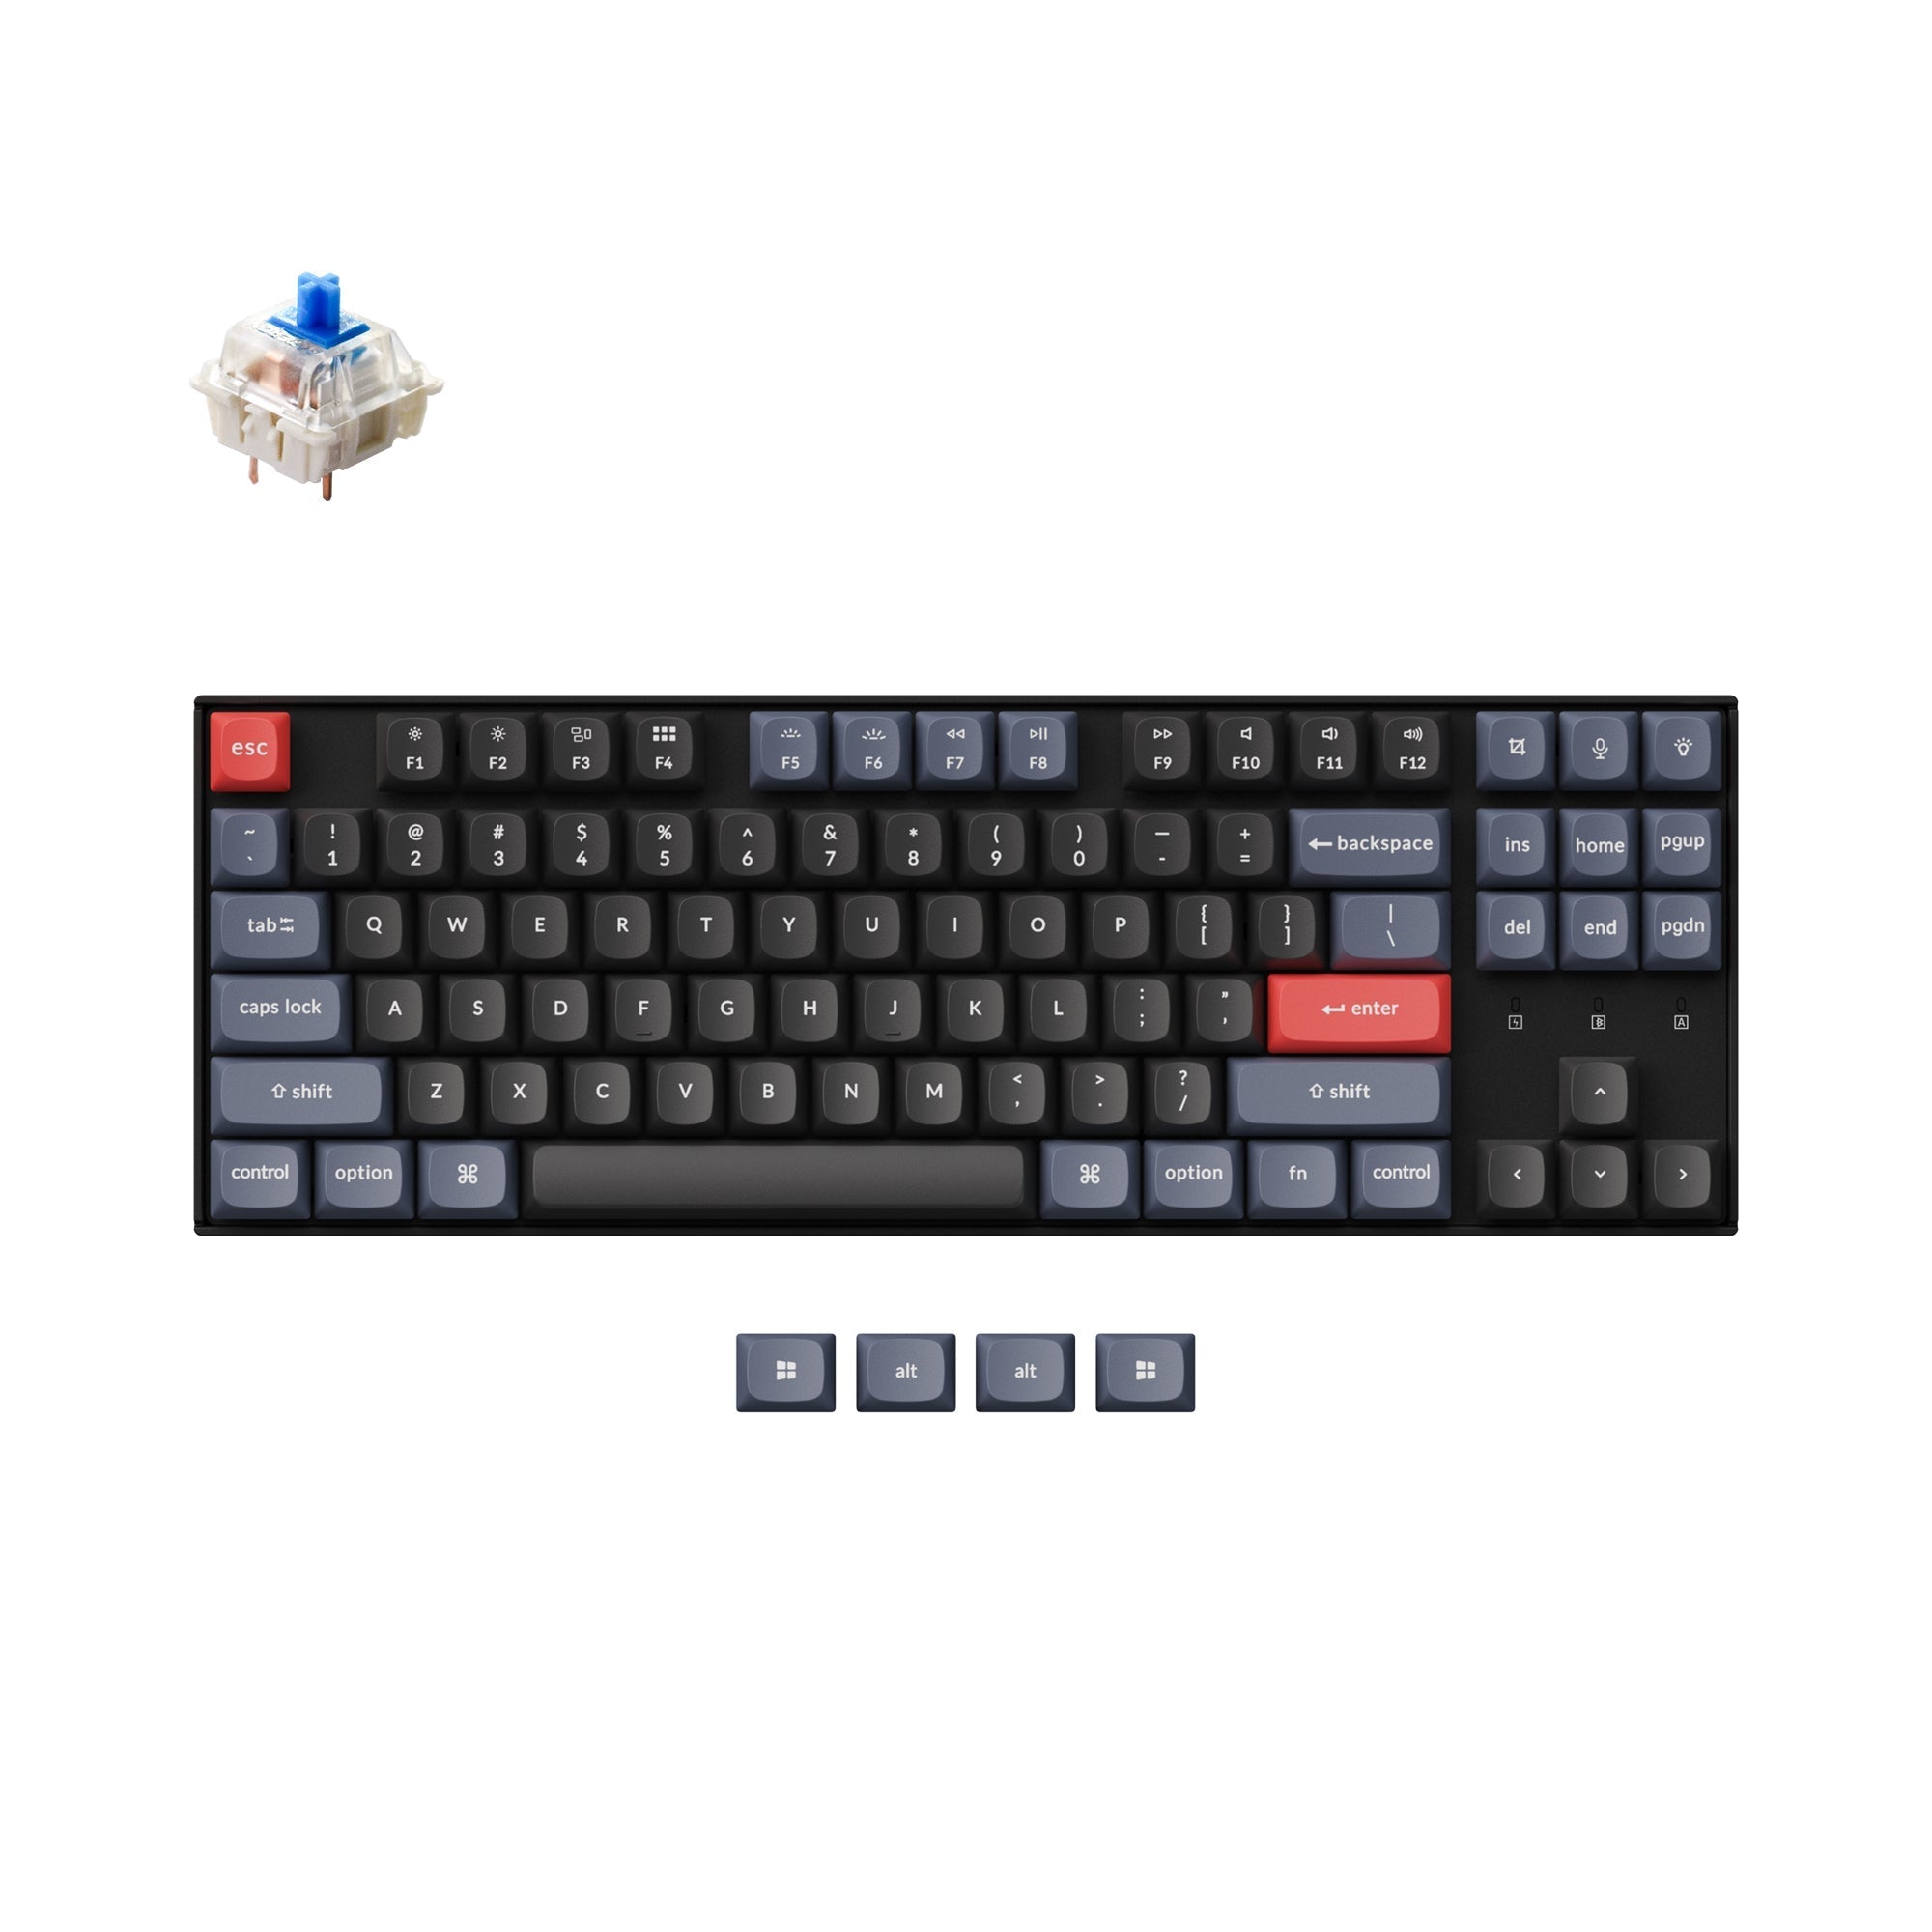 Keychron K8 Pro QMK/VIA Wireless Mechanical Keyboard for Mac and Windows PBT keycaps with PCB screw-in stabilizer and hot-swappable Gateron G Pro mechanical blue switch